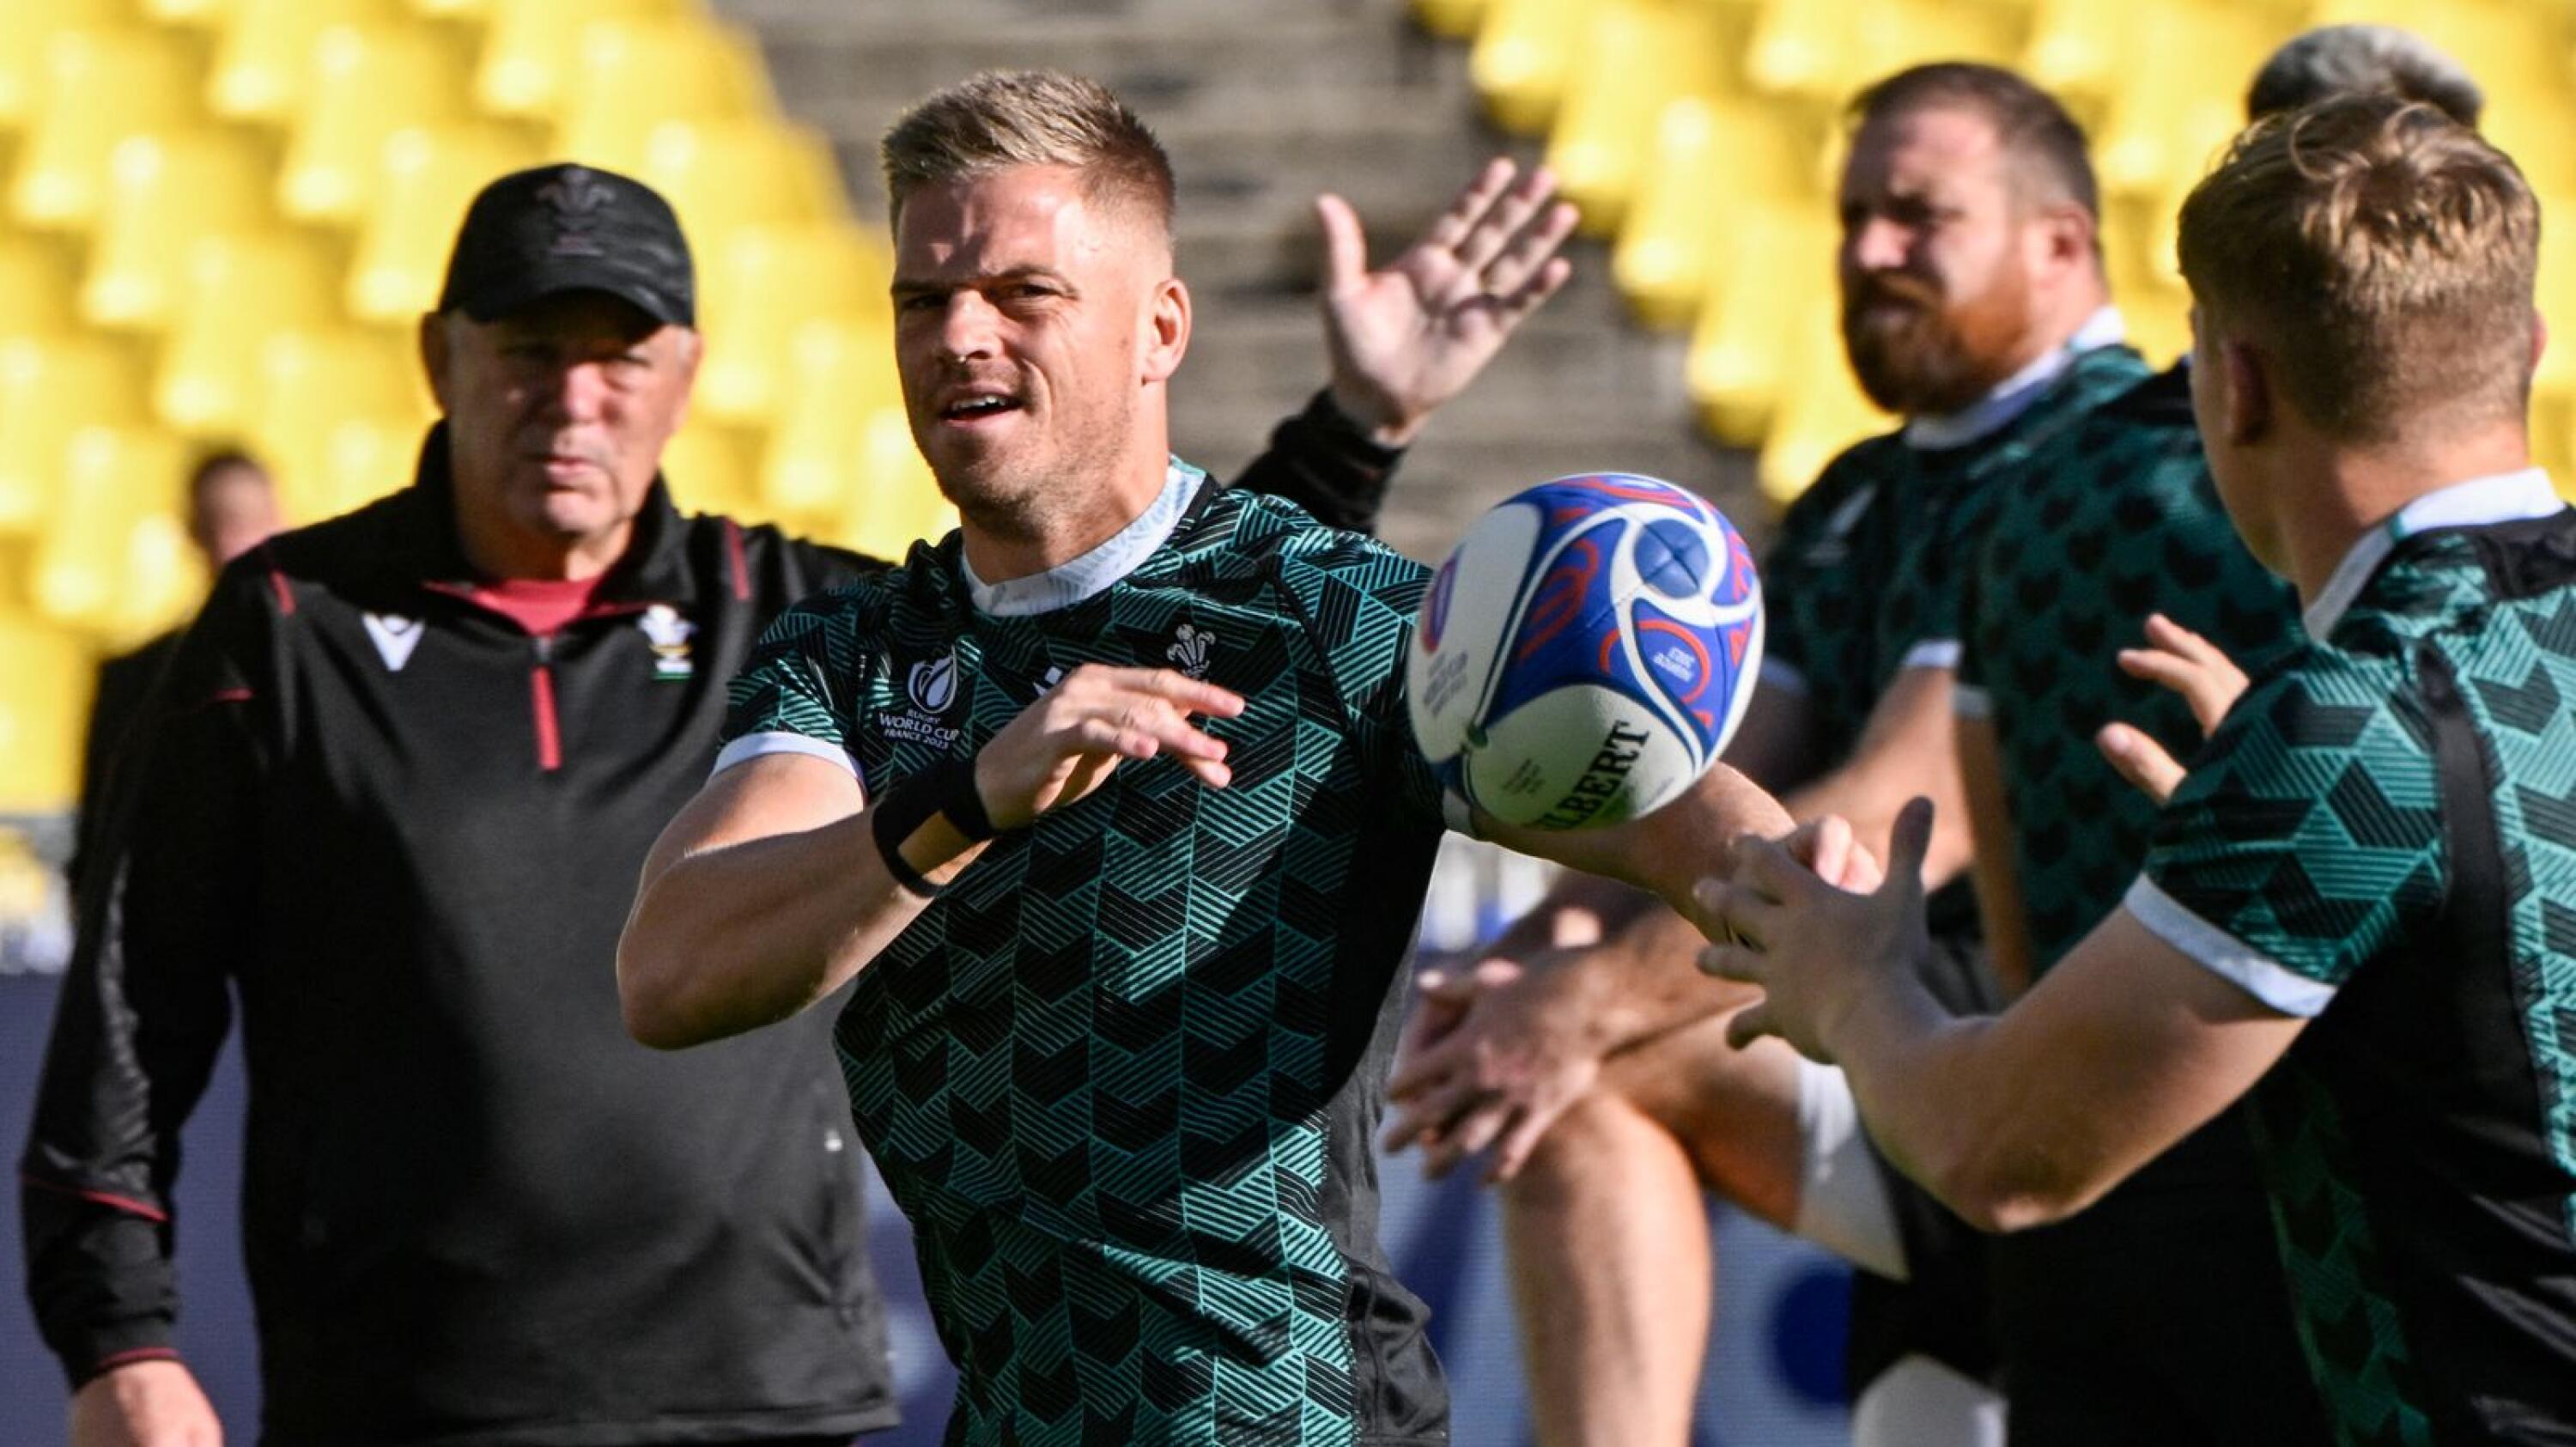 Wales' flyhalf Gareth Anscombe (2ndL) attends the captain's run at la Beaujoire Stadium in Nantes